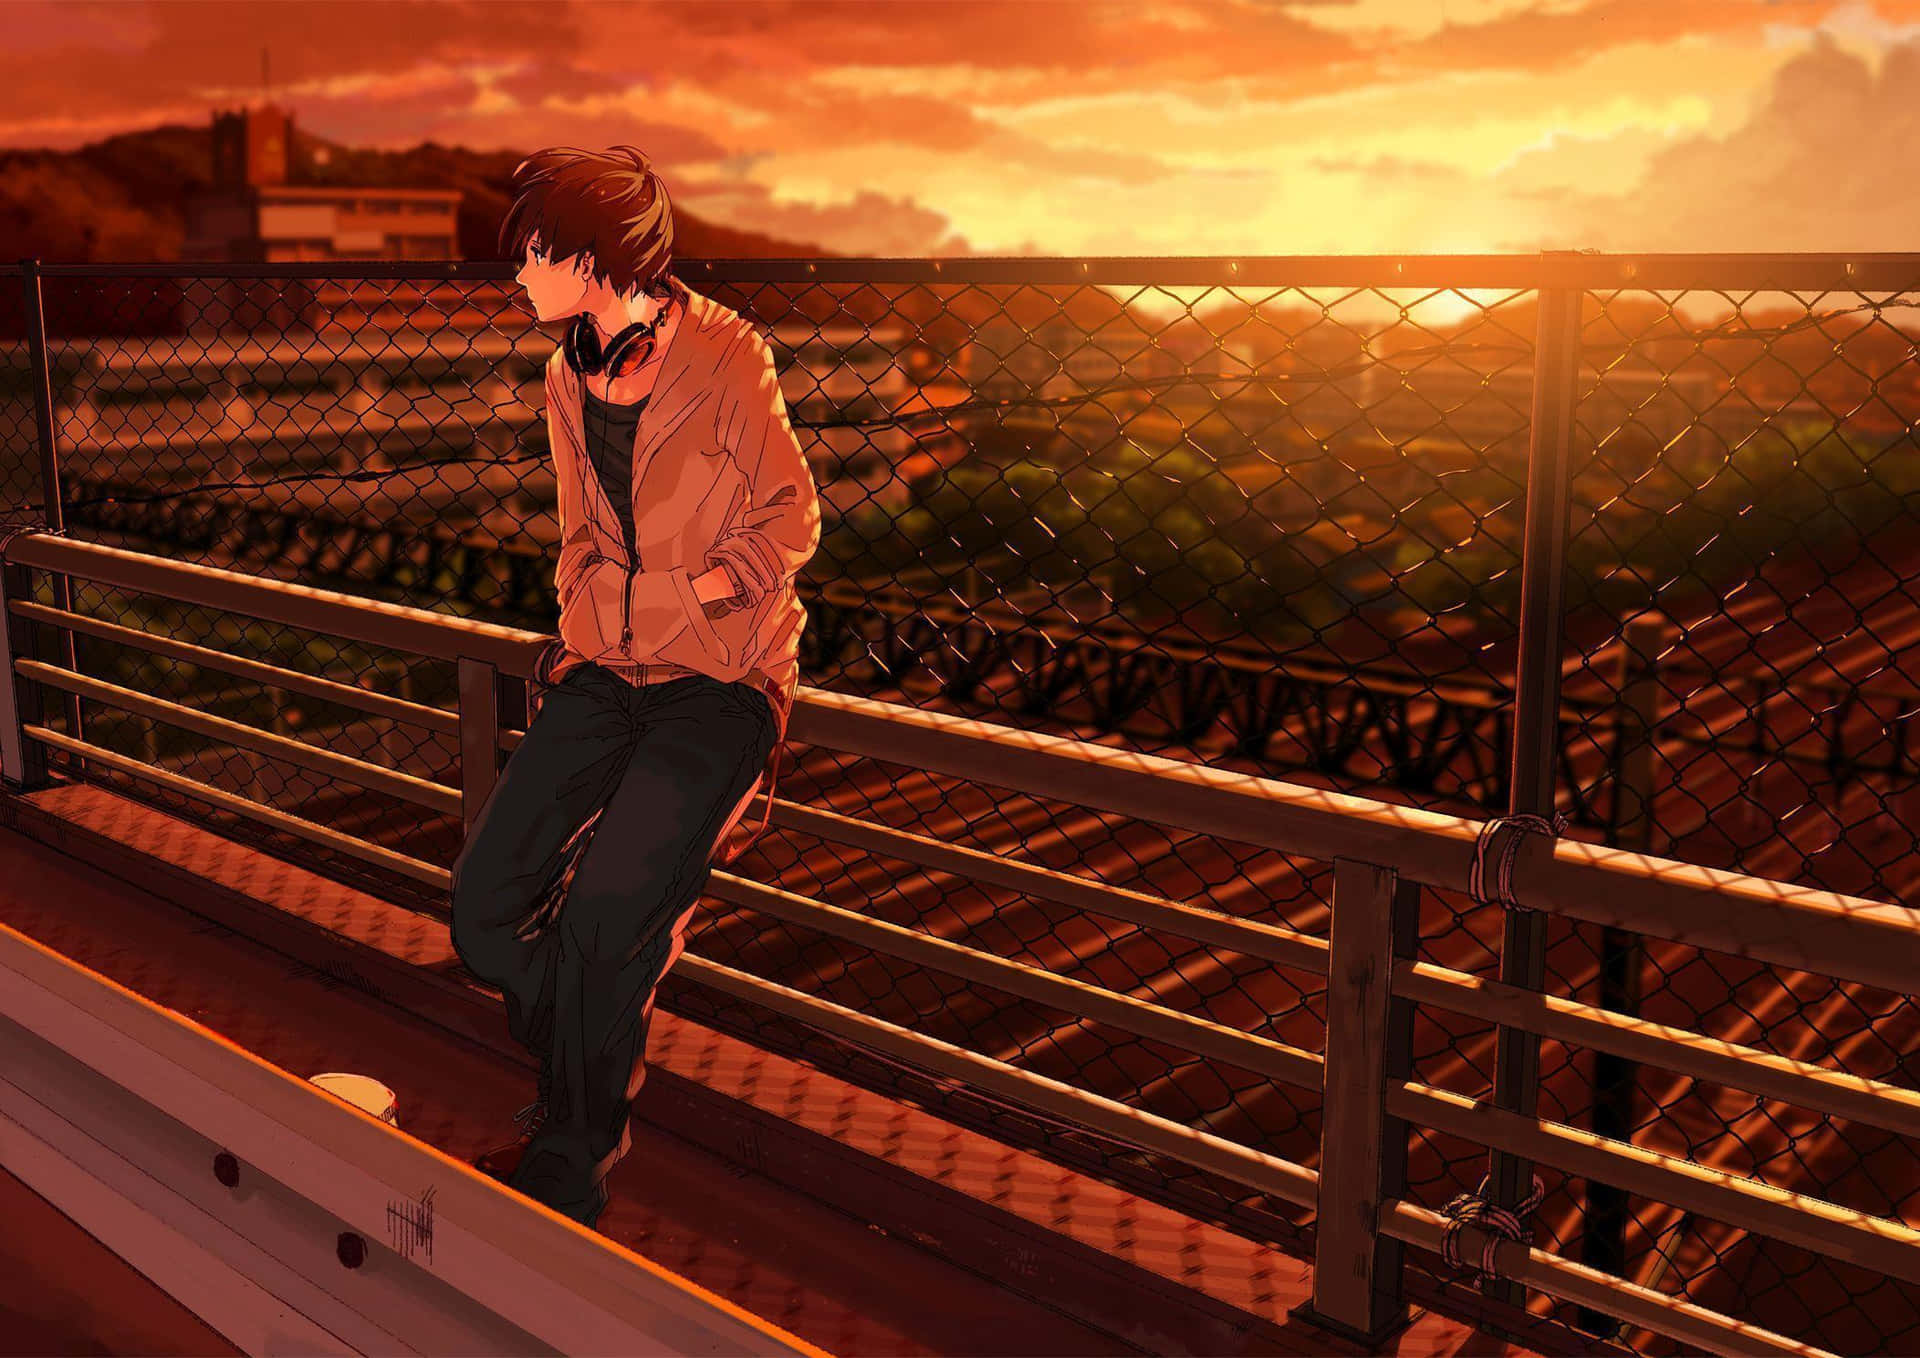 "A young boy looks longingly at a beautiful sunset"